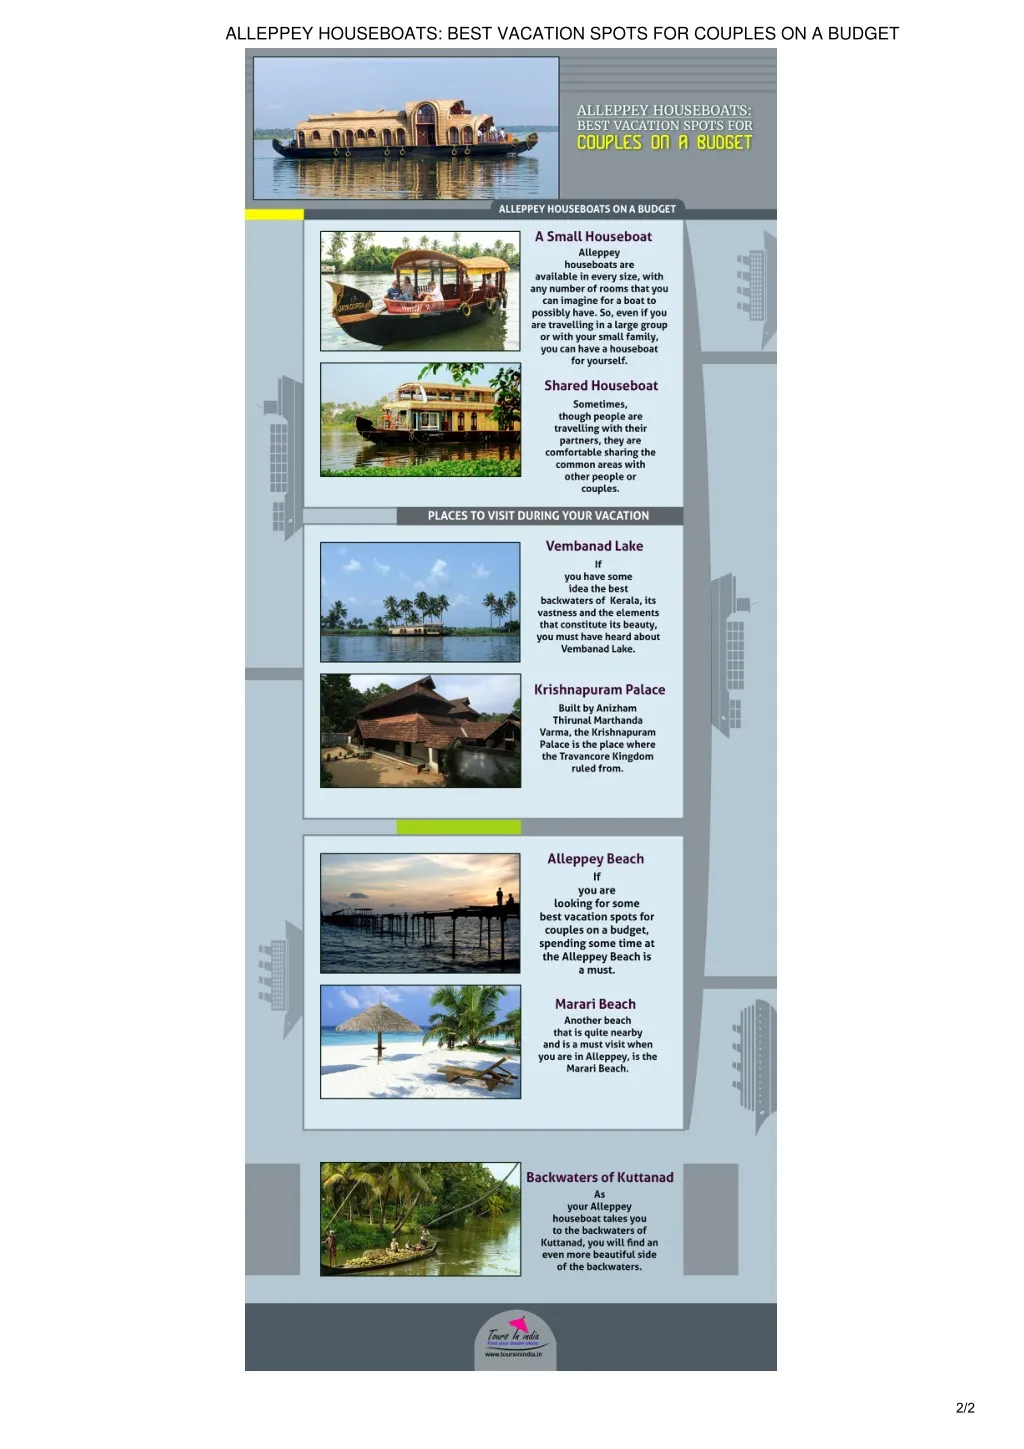 alleppey houseboats best vacation spots